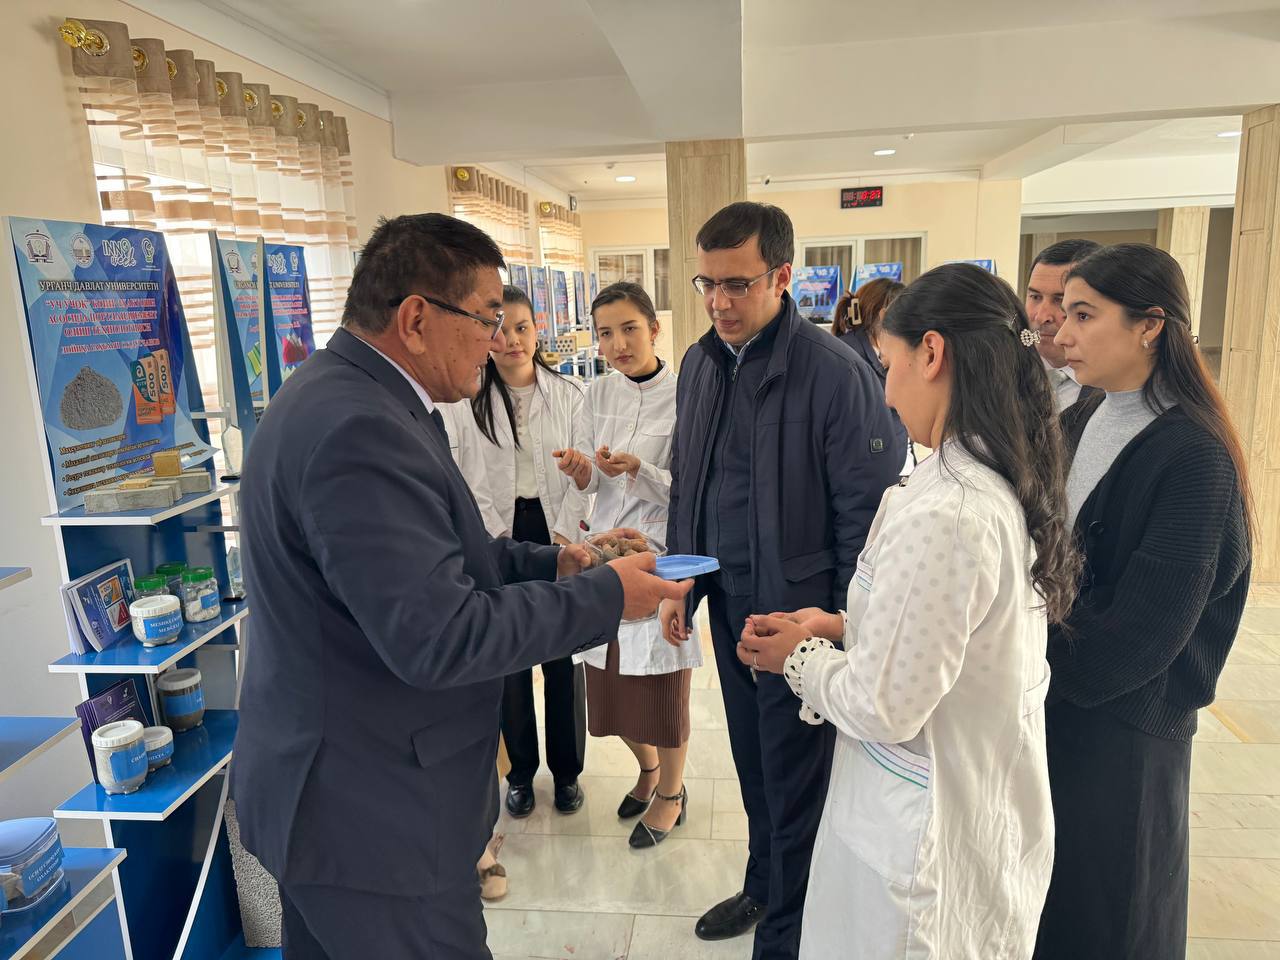 In our province, the focus is on relying on the achievements of science and cooperation with scientists in the development of localization and industr